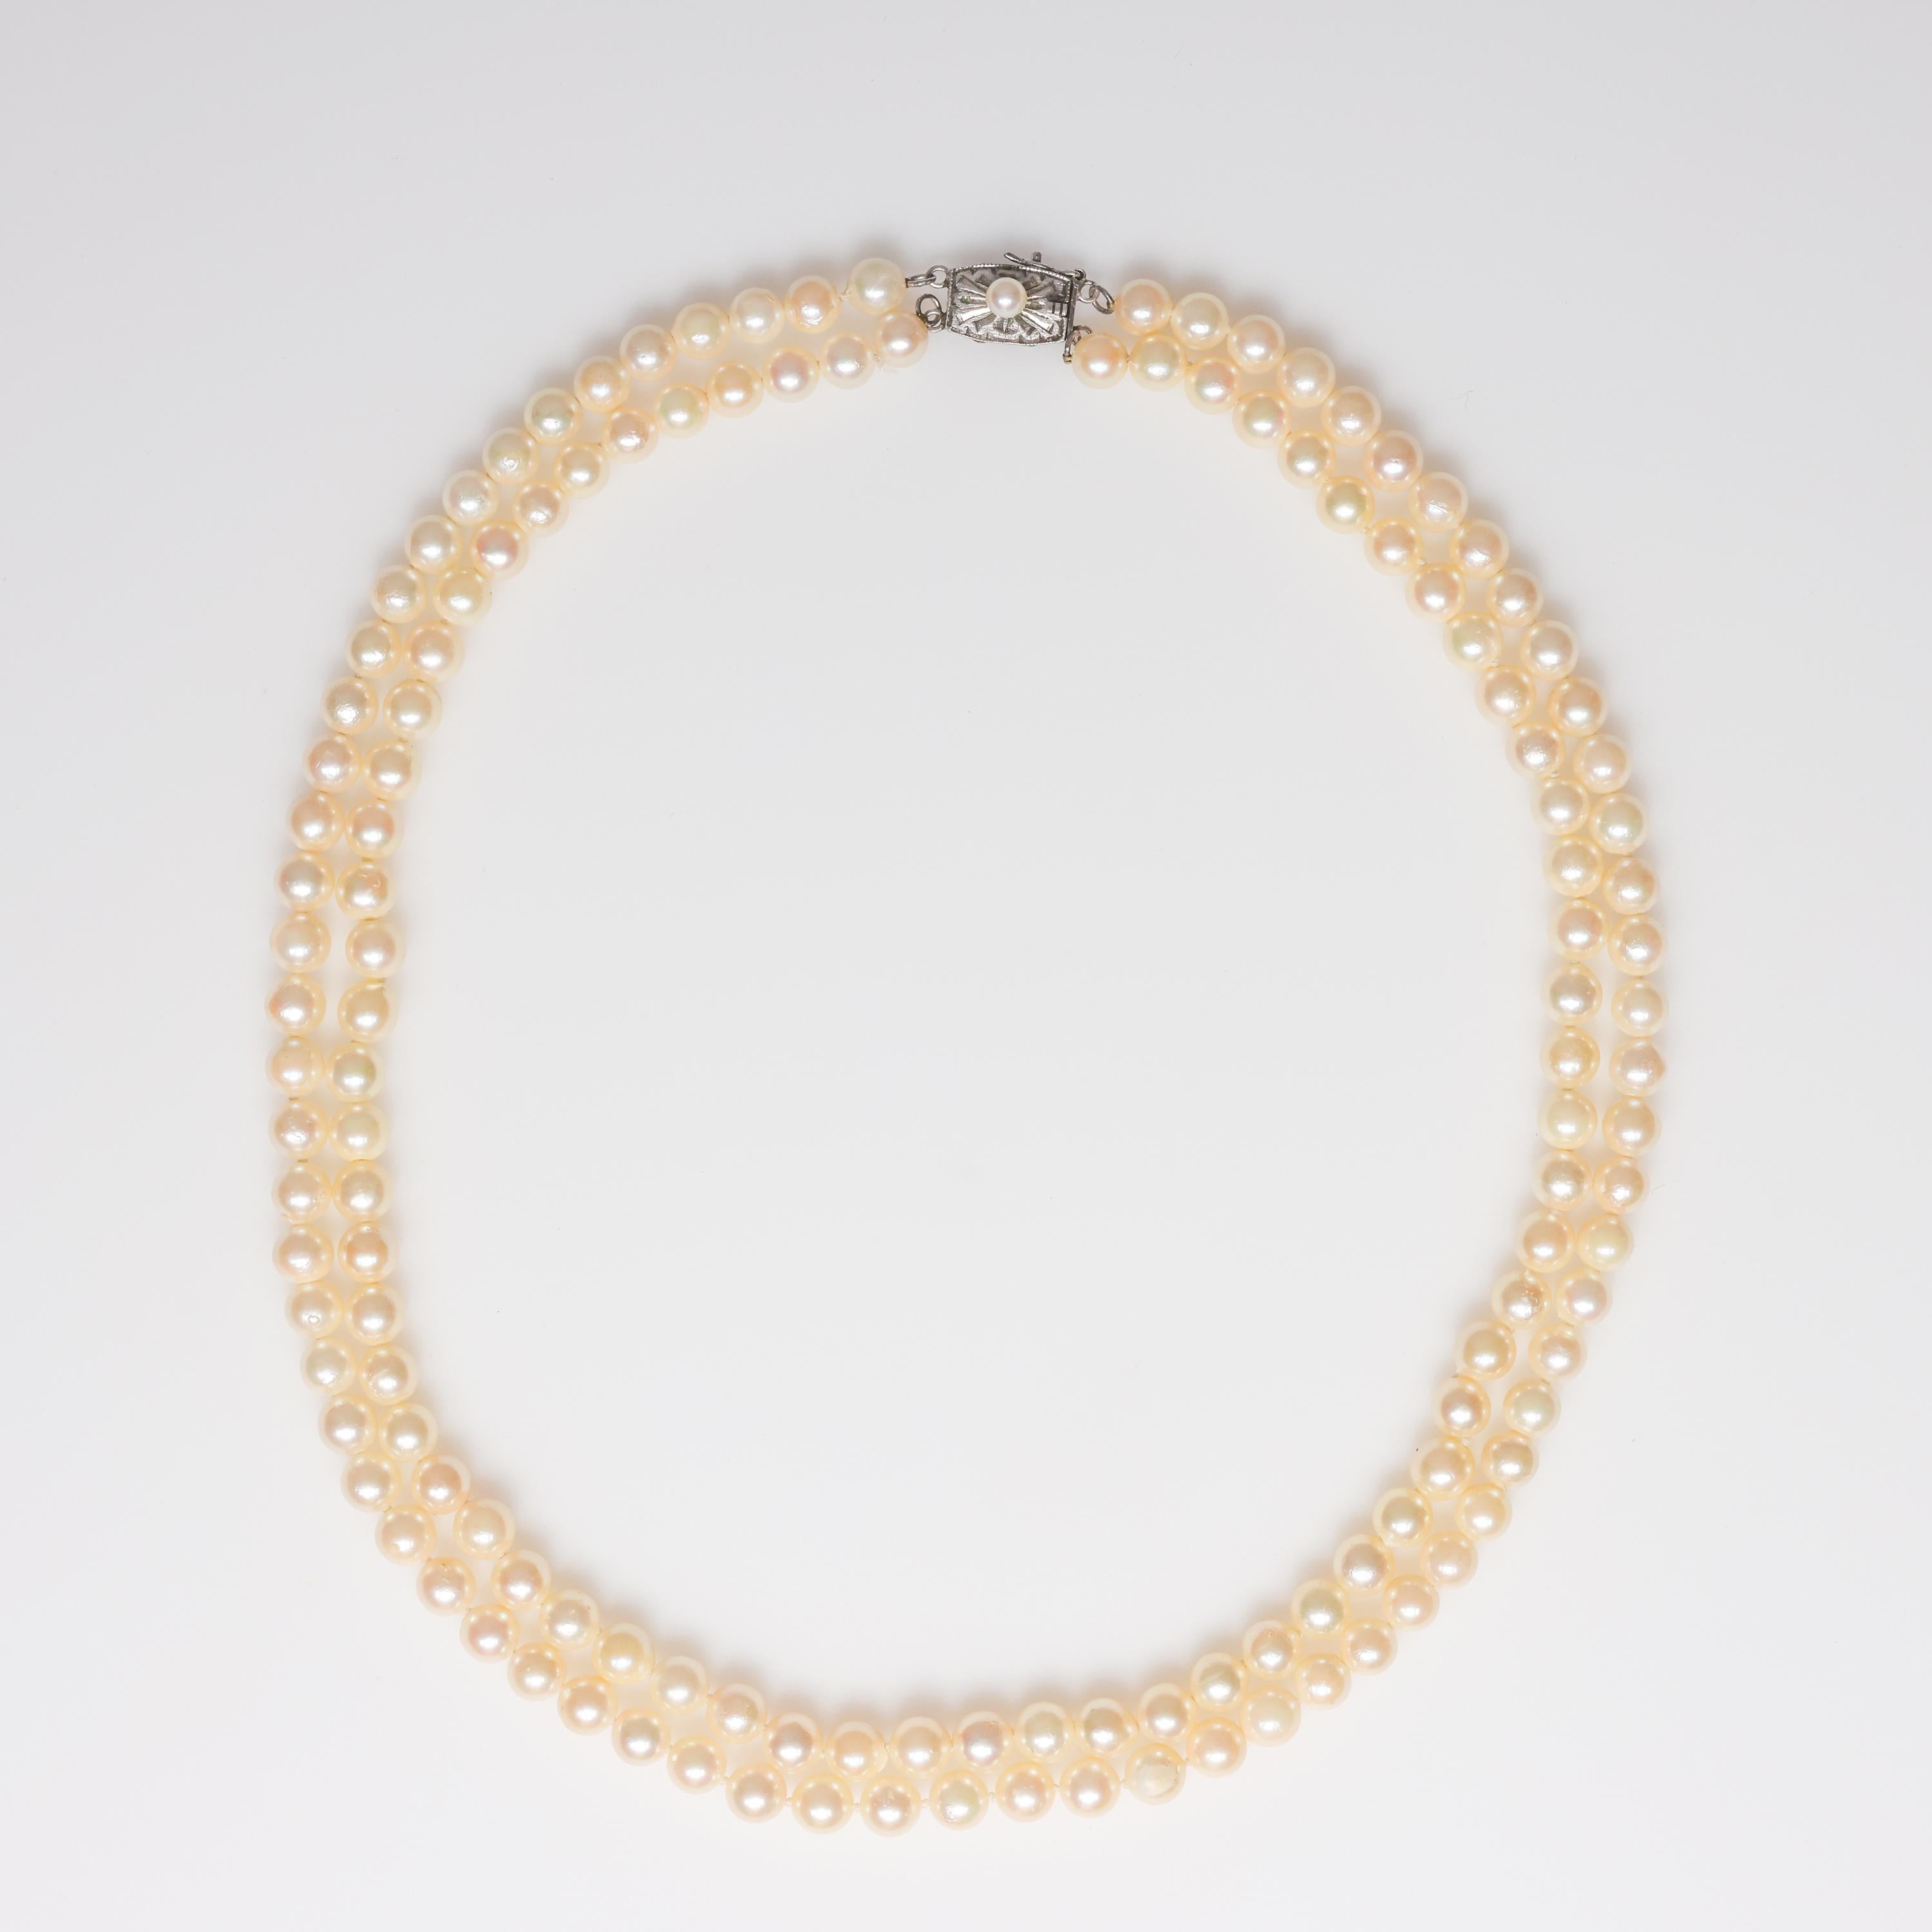 This luxurious strand of sumptuous cultured Akoya pearls dates from the late 1920s or early 1930s and features 137 gorgeous early cultured Akoya pearls. The 5.4mm to 5.97mm pearls represent the finest pearls of their day. The pearl culturing process